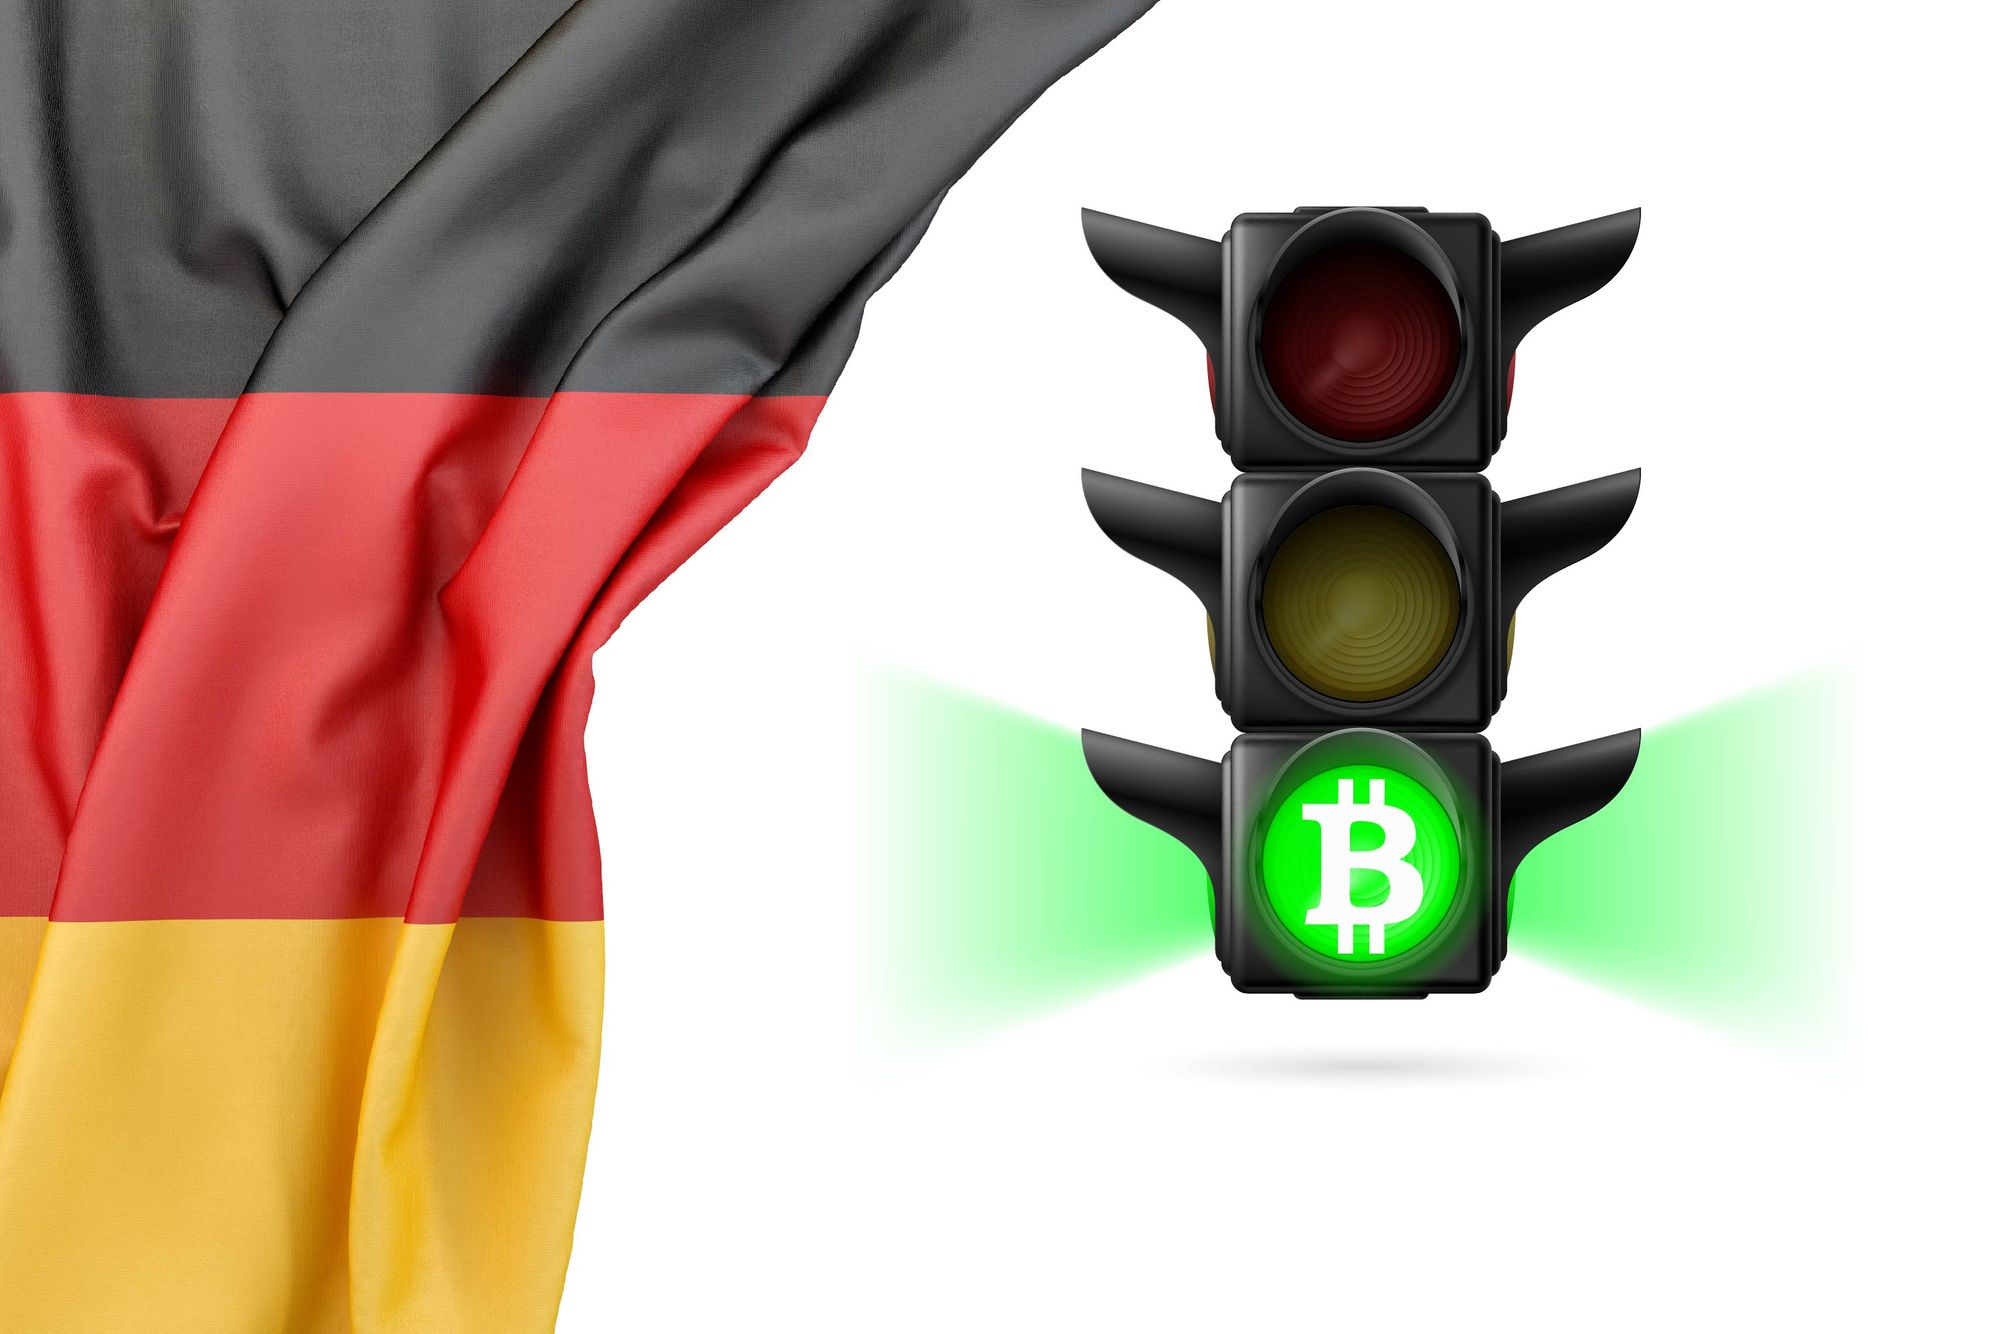 Germany is giving the green light to cryptocurrencies with a new law allowing institutional funds to invest in this asset class